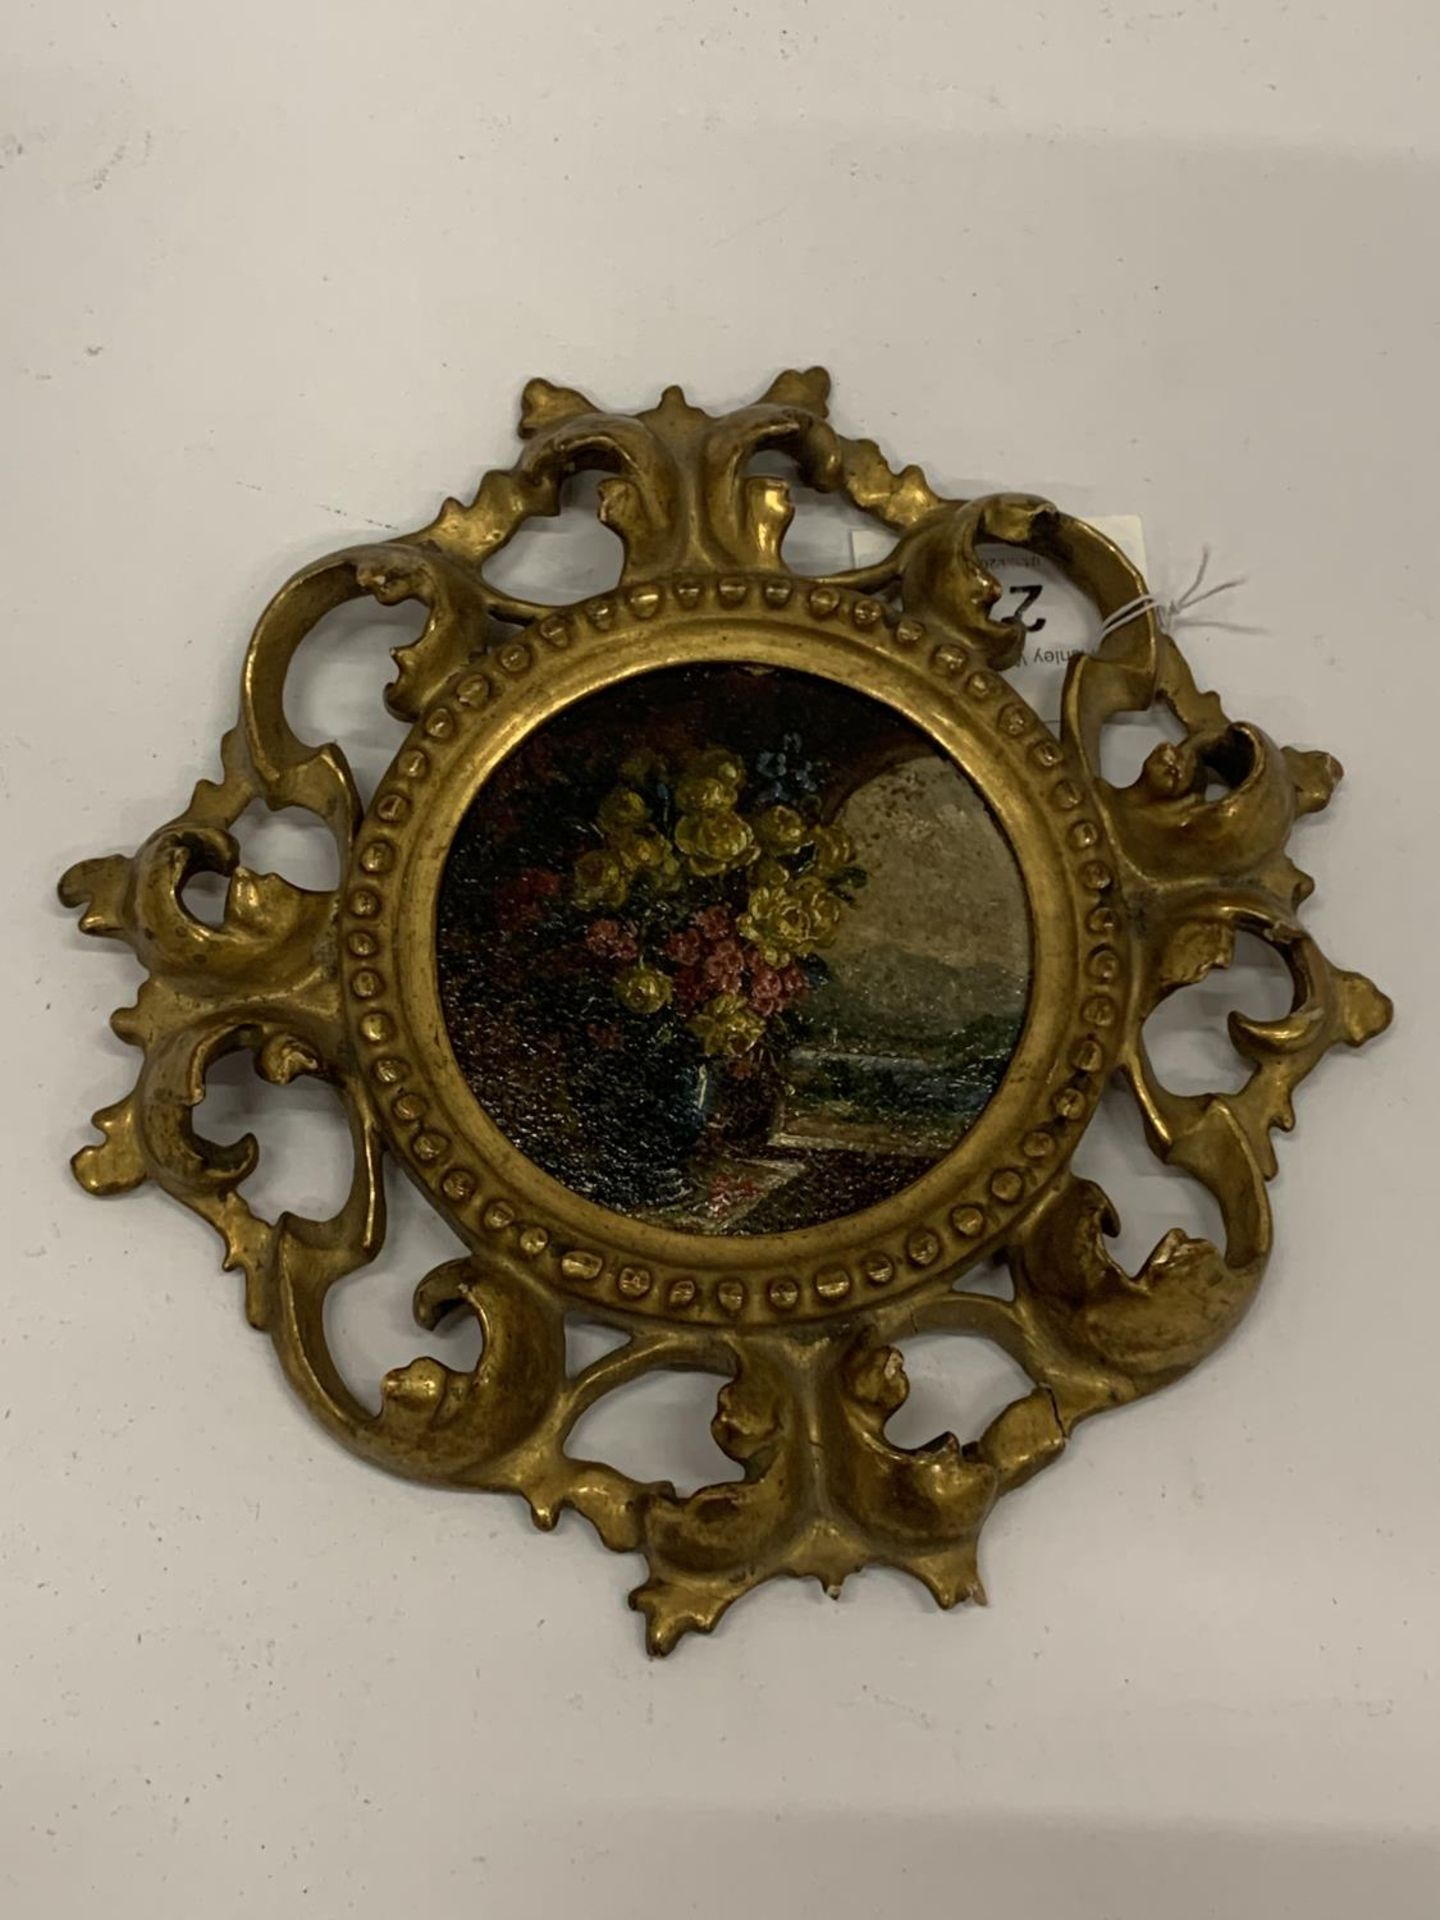 A 19TH CENTURY STILL LIFE OIL PAINTING SET IN ORNATE GILT GESSO FRAME, DIAMETER 16CM - Image 2 of 6